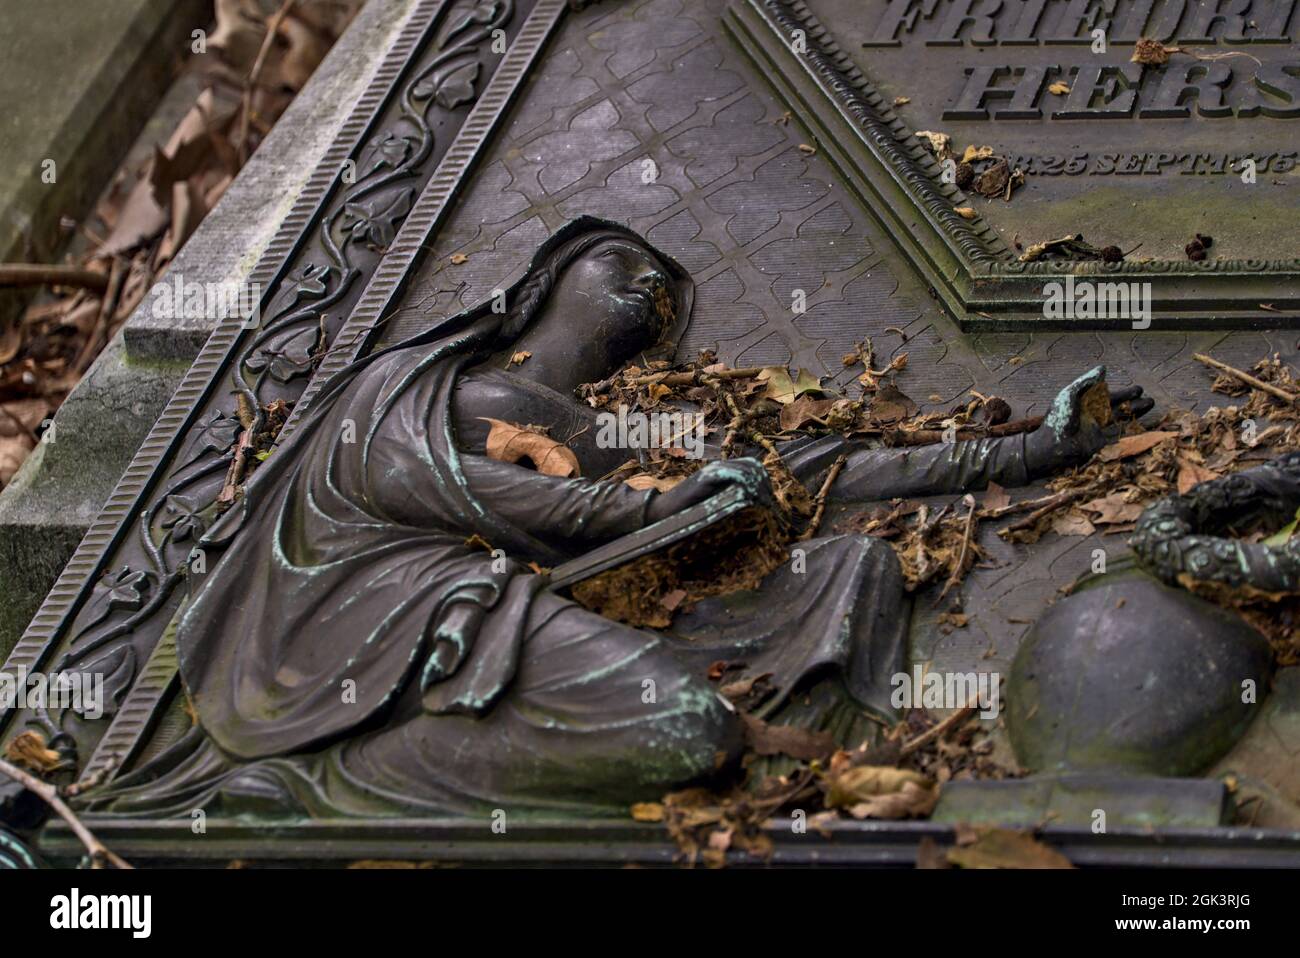 Part of a weathered ornamental stone sculpture in a cemetery Stock Photo